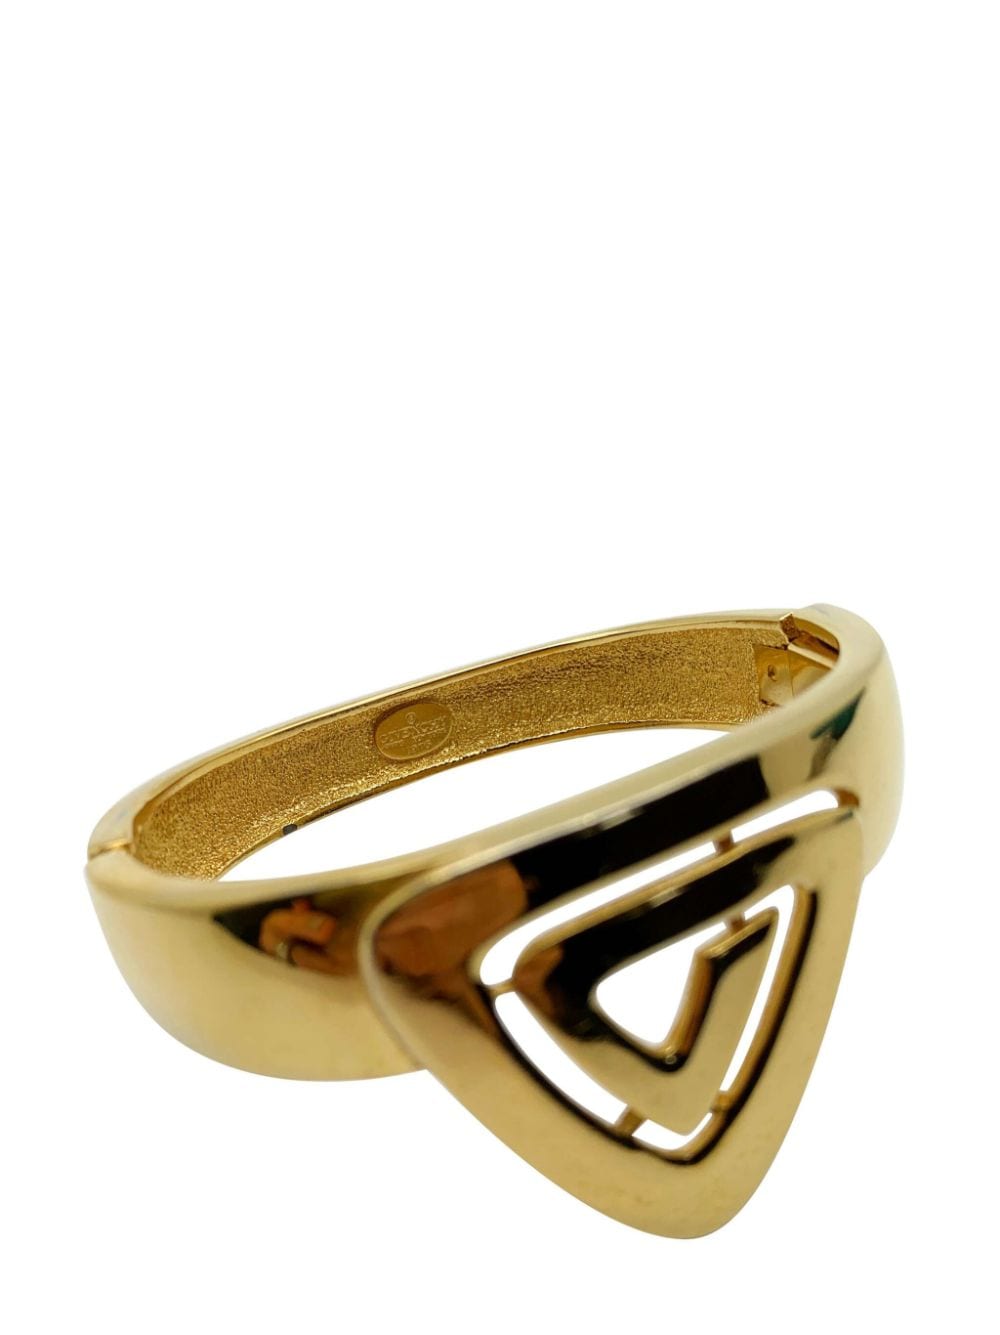 Pre-owned Givenchy Vintage  Modernist Cuff Dated 1976 In Gold